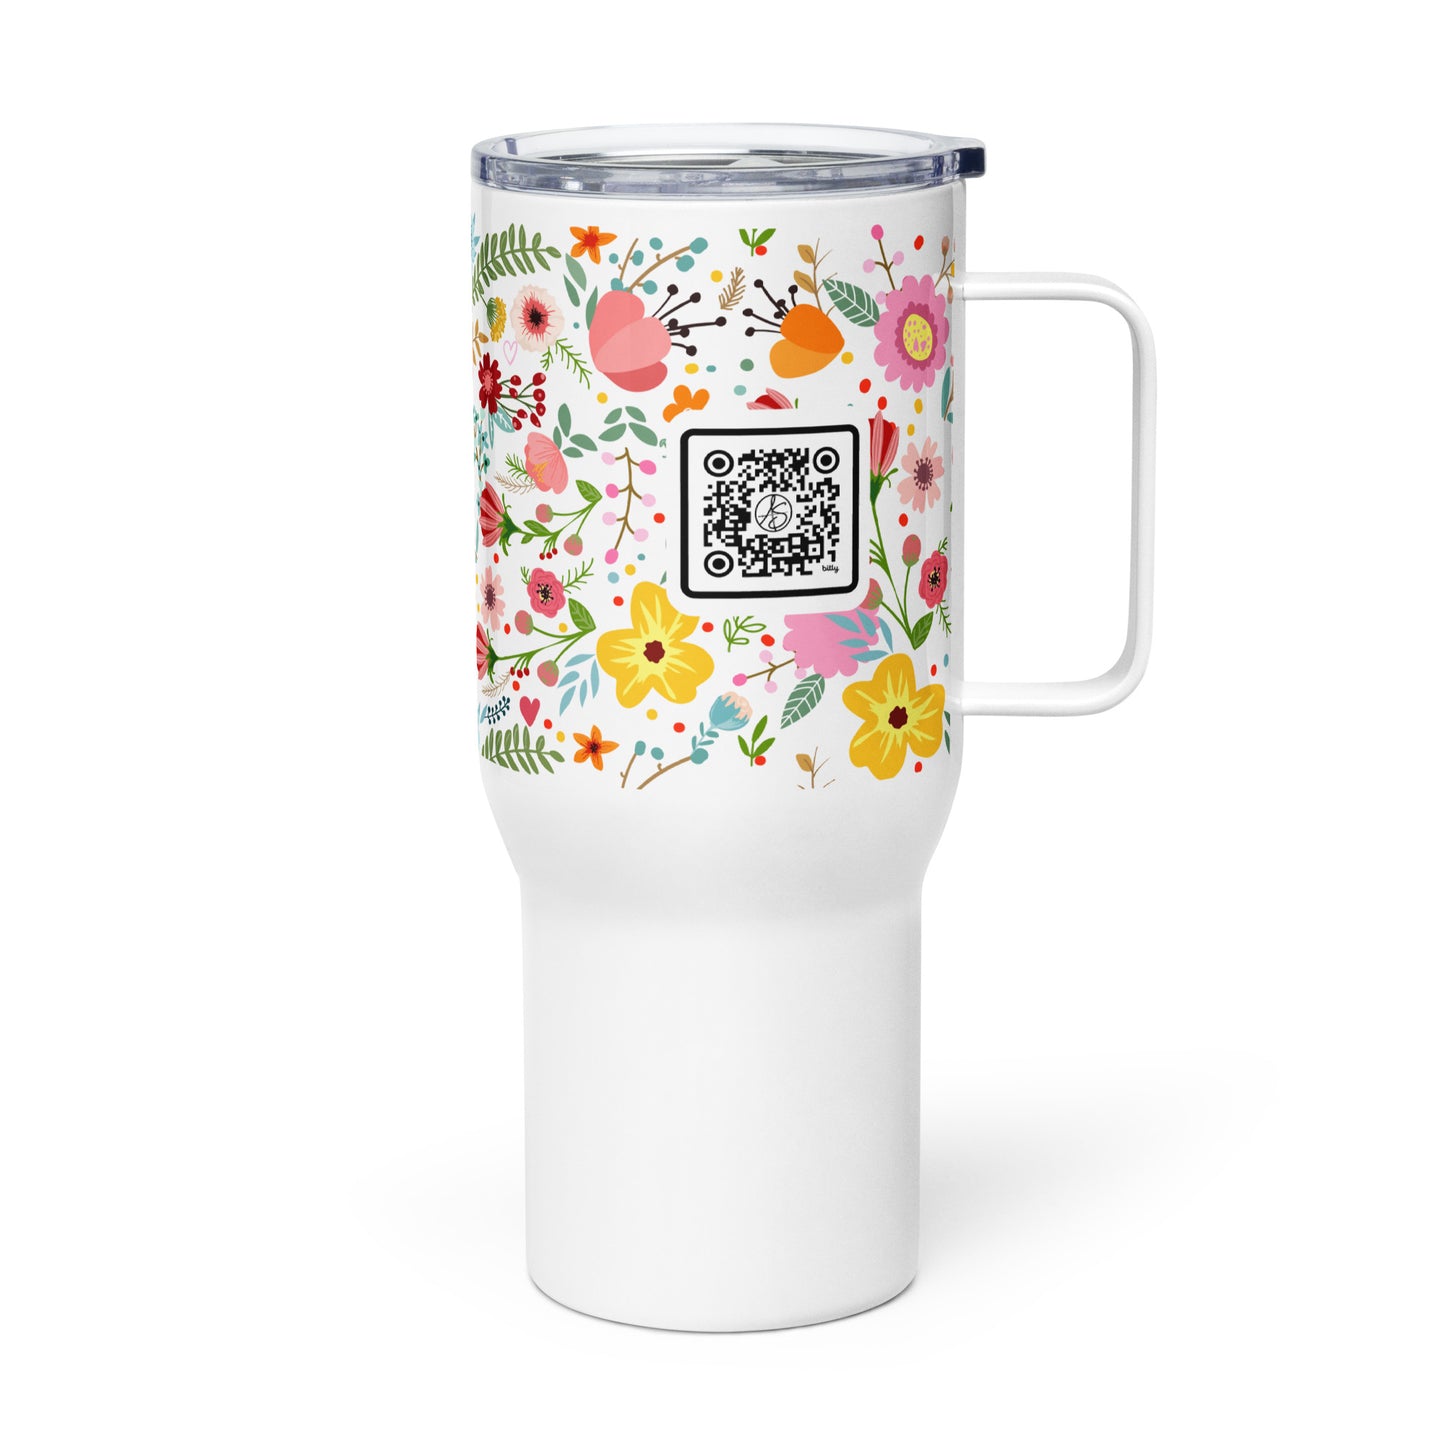 In Christ Alone Travel Mug with Handle